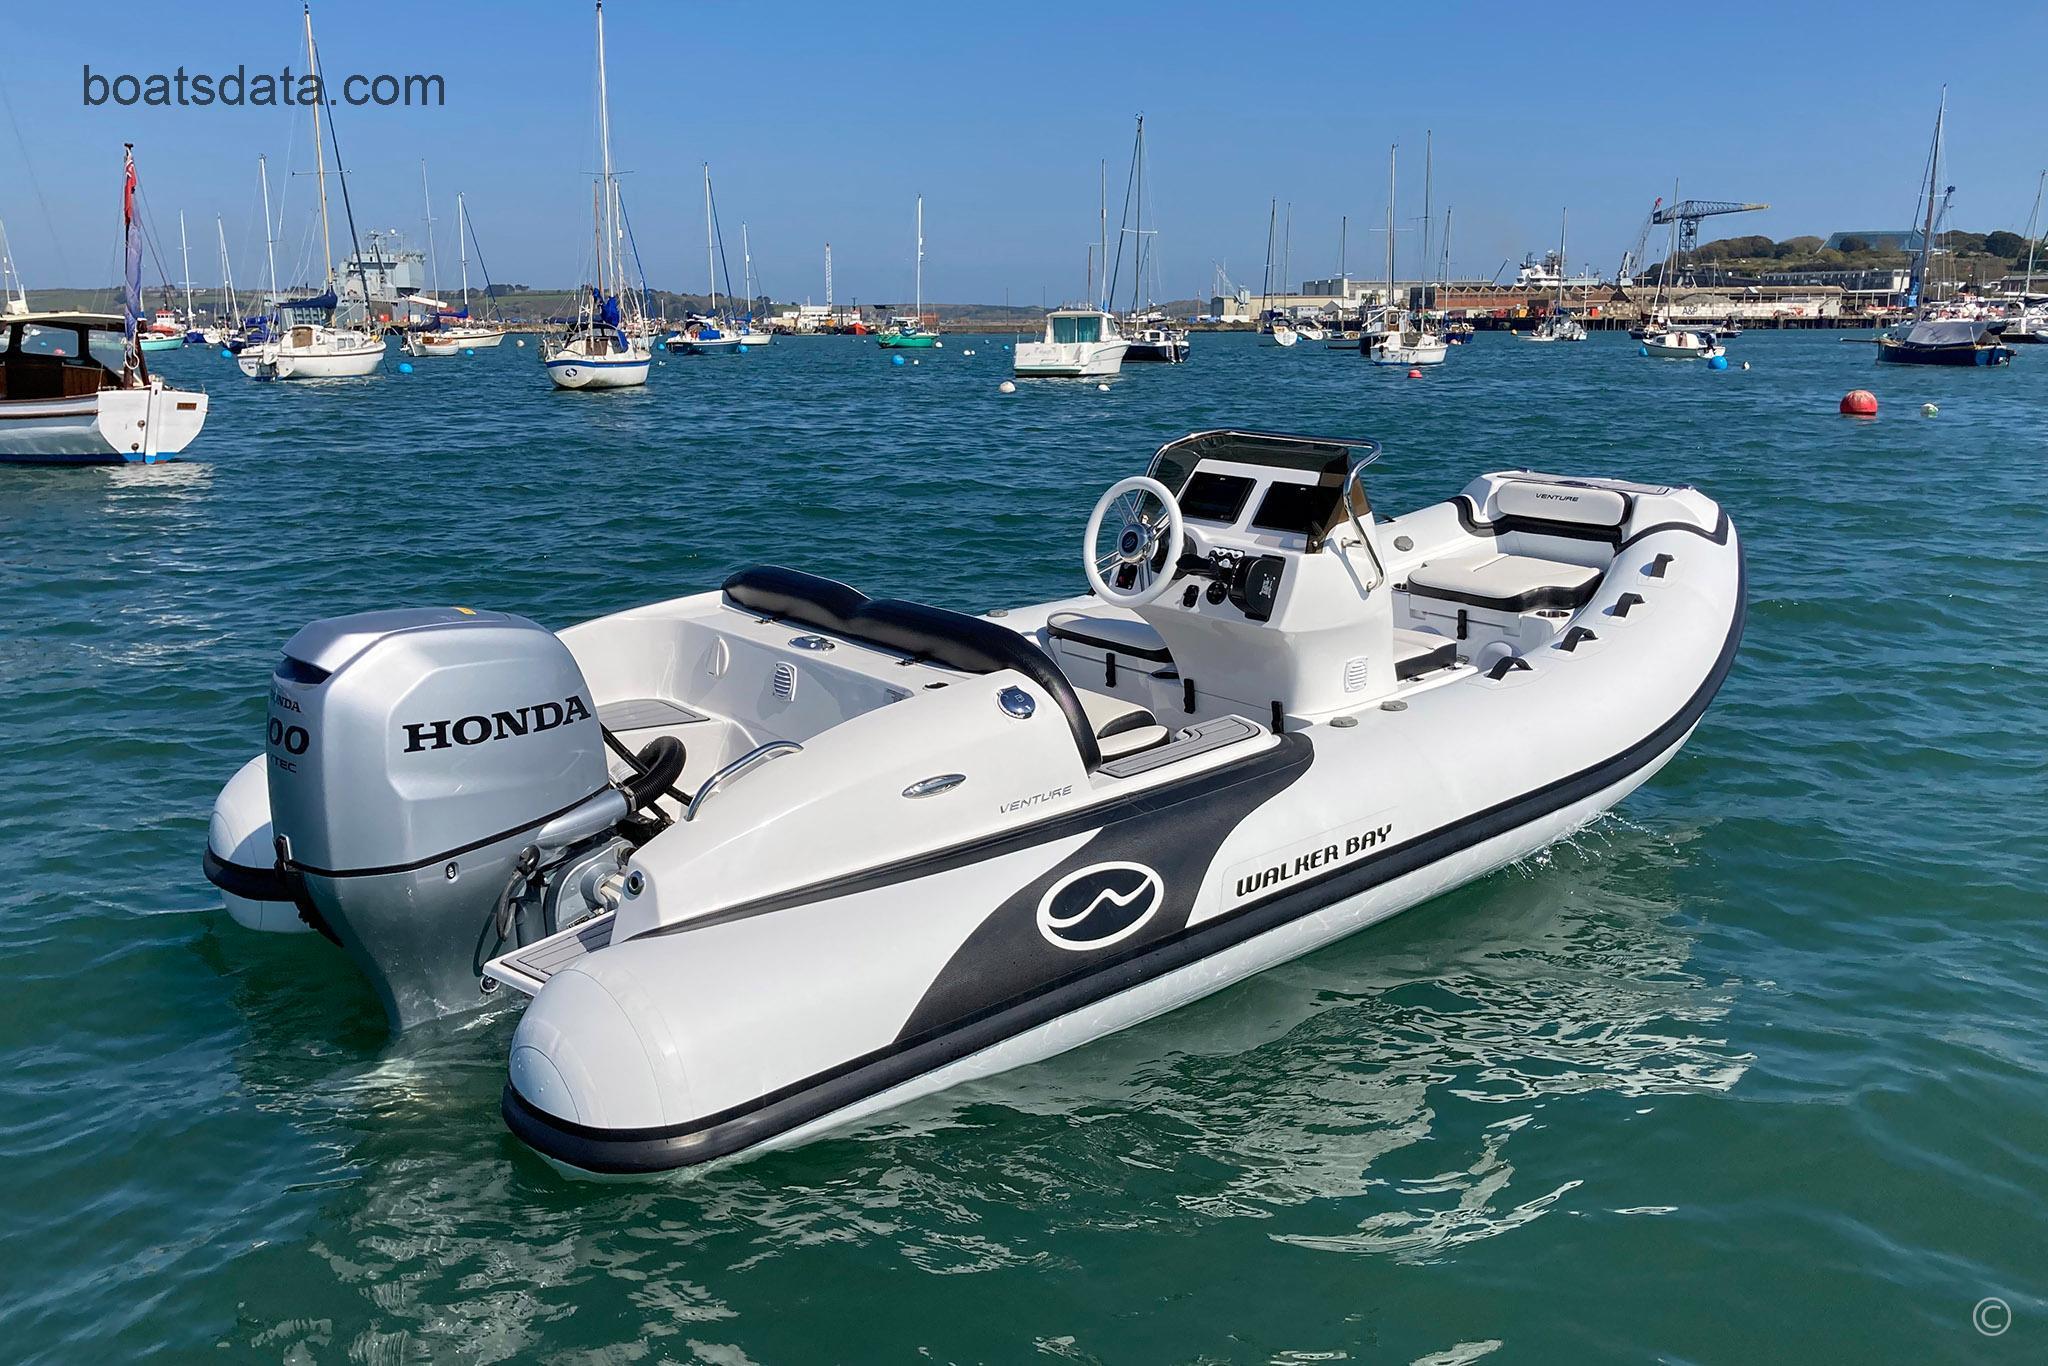 Walker Bay Venture 16 with 5 Seats tv detailed specifications and features